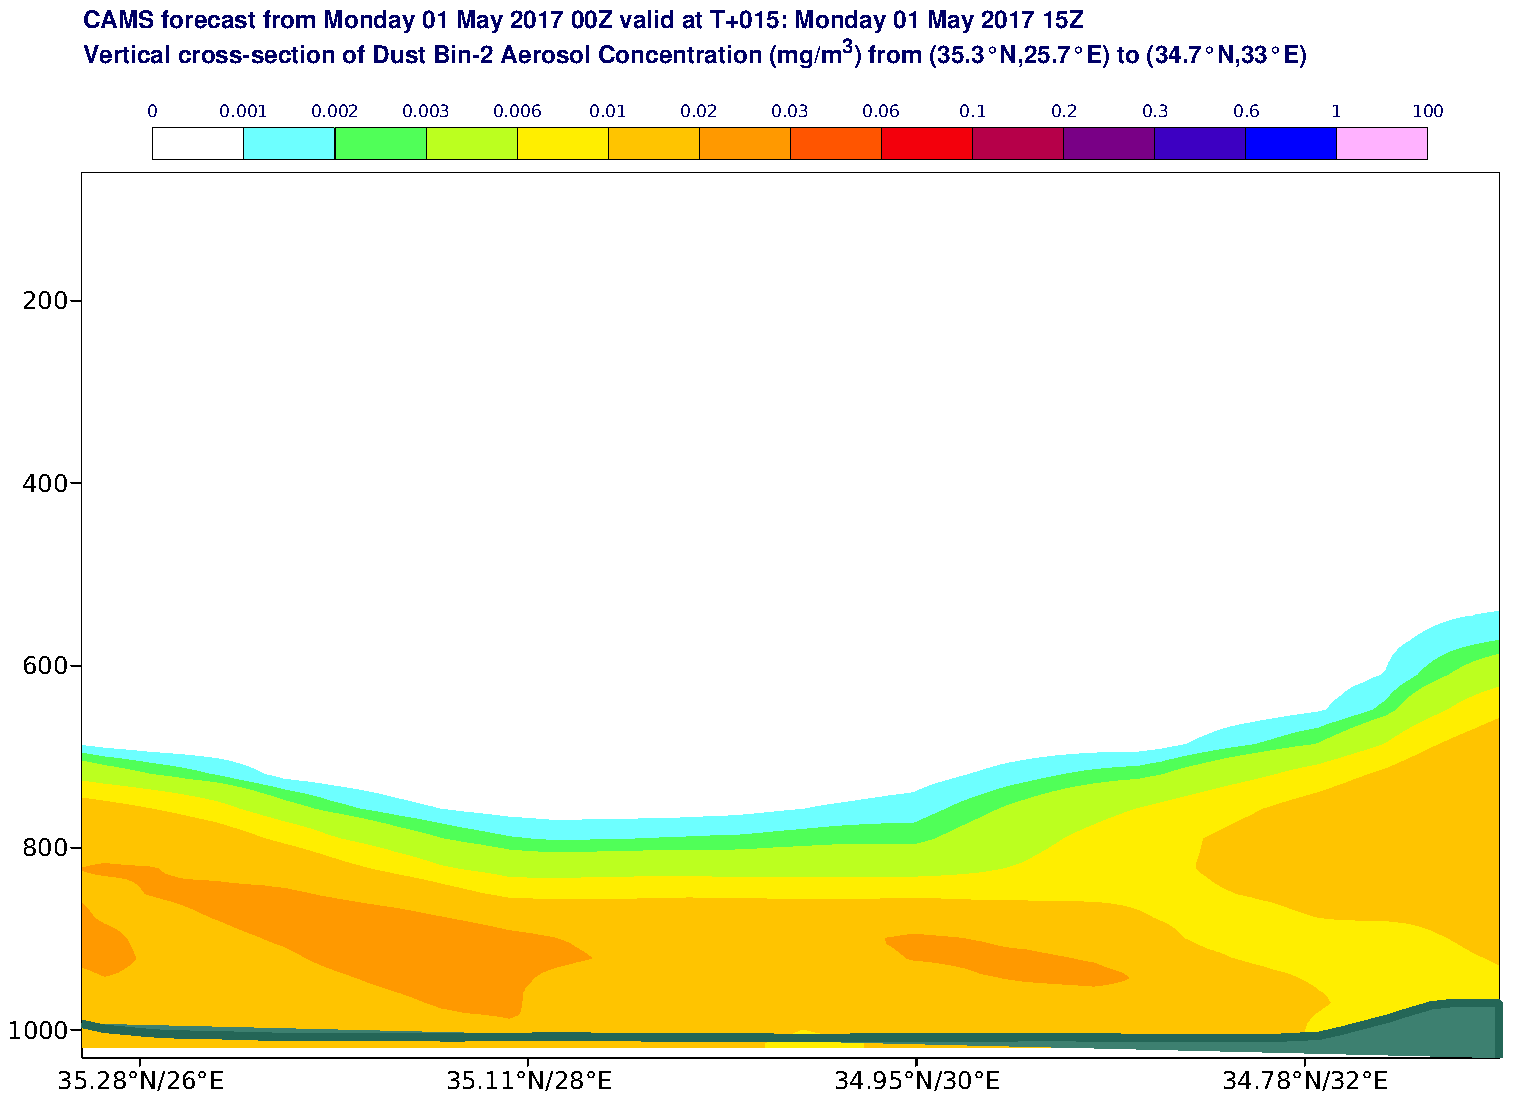 Vertical cross-section of Dust Bin-2 Aerosol Concentration (mg/m3) valid at T15 - 2017-05-01 15:00